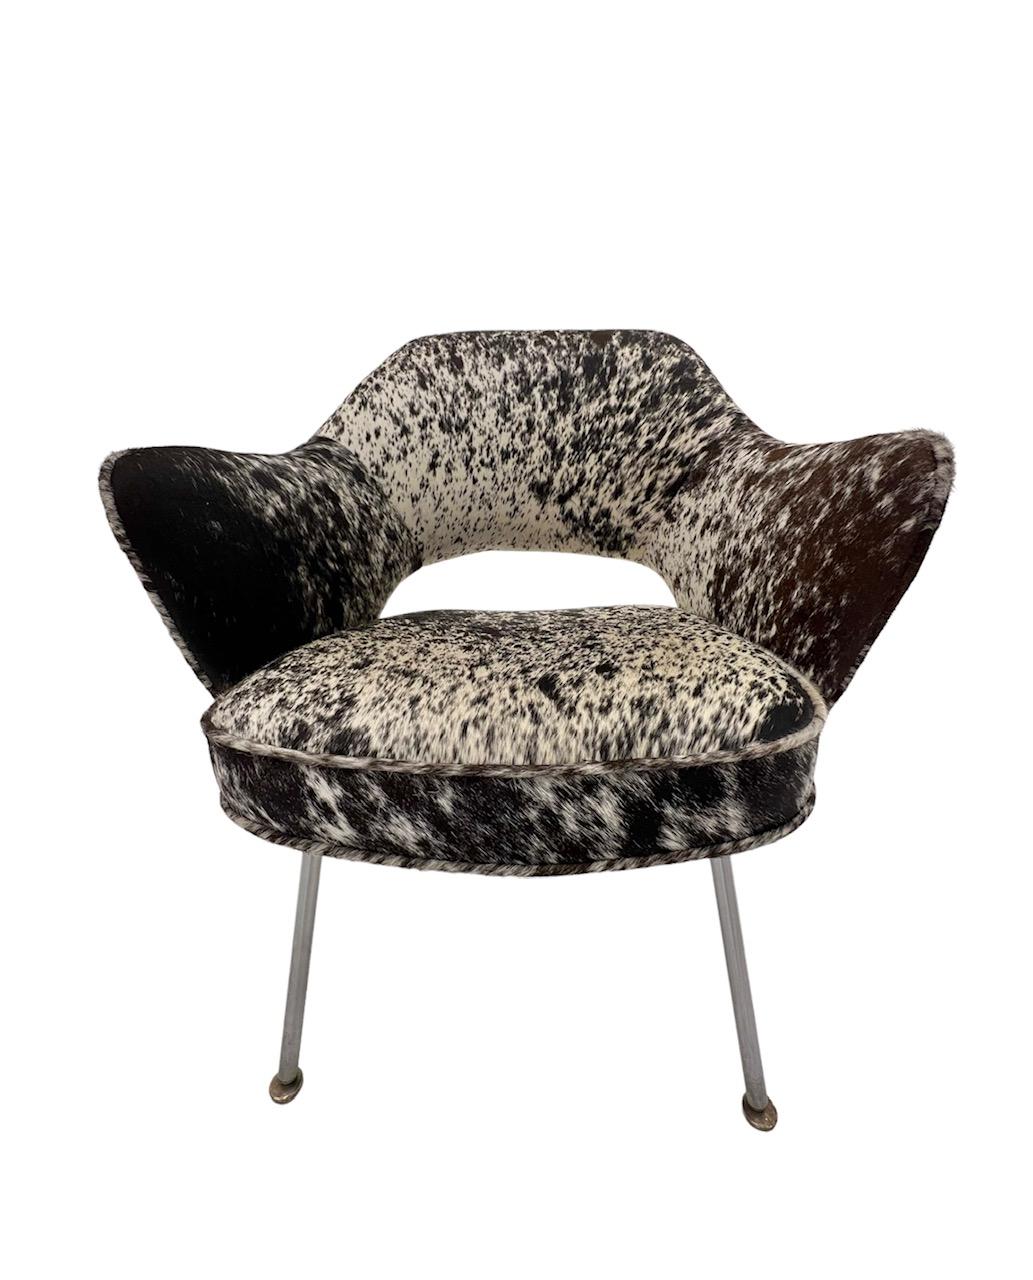 Featured in nearly all Florence Knoll-designed interiors, the Saarinen Executive Chair has remained one of the most popular designs for many decades. Our expert team of skilled upholsterers have transformed this unique design in South African cow